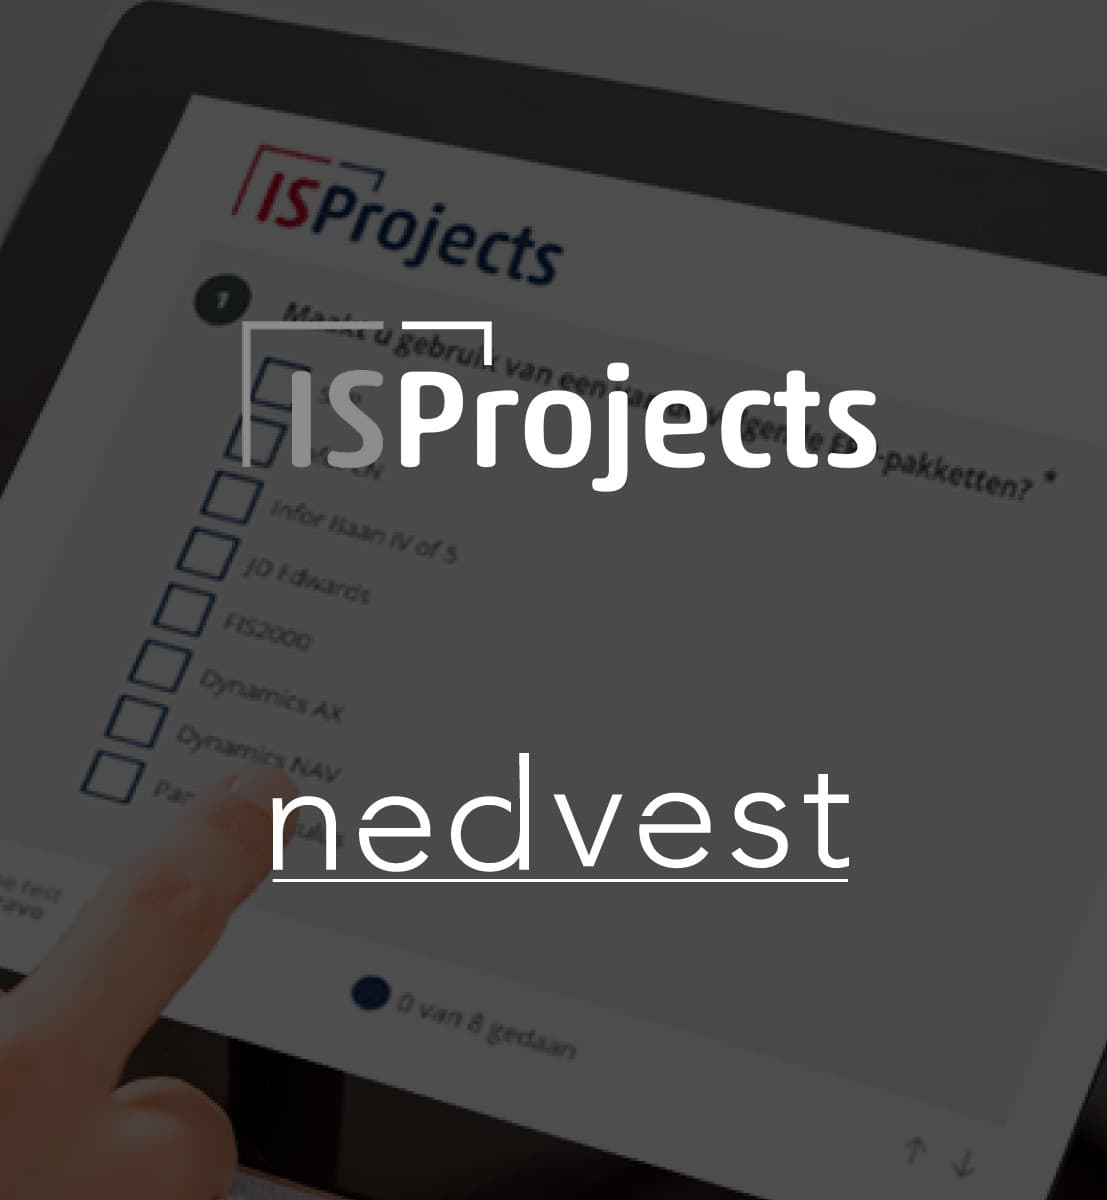 DEX international M&A advised ISProjects on the sale to Nedvest